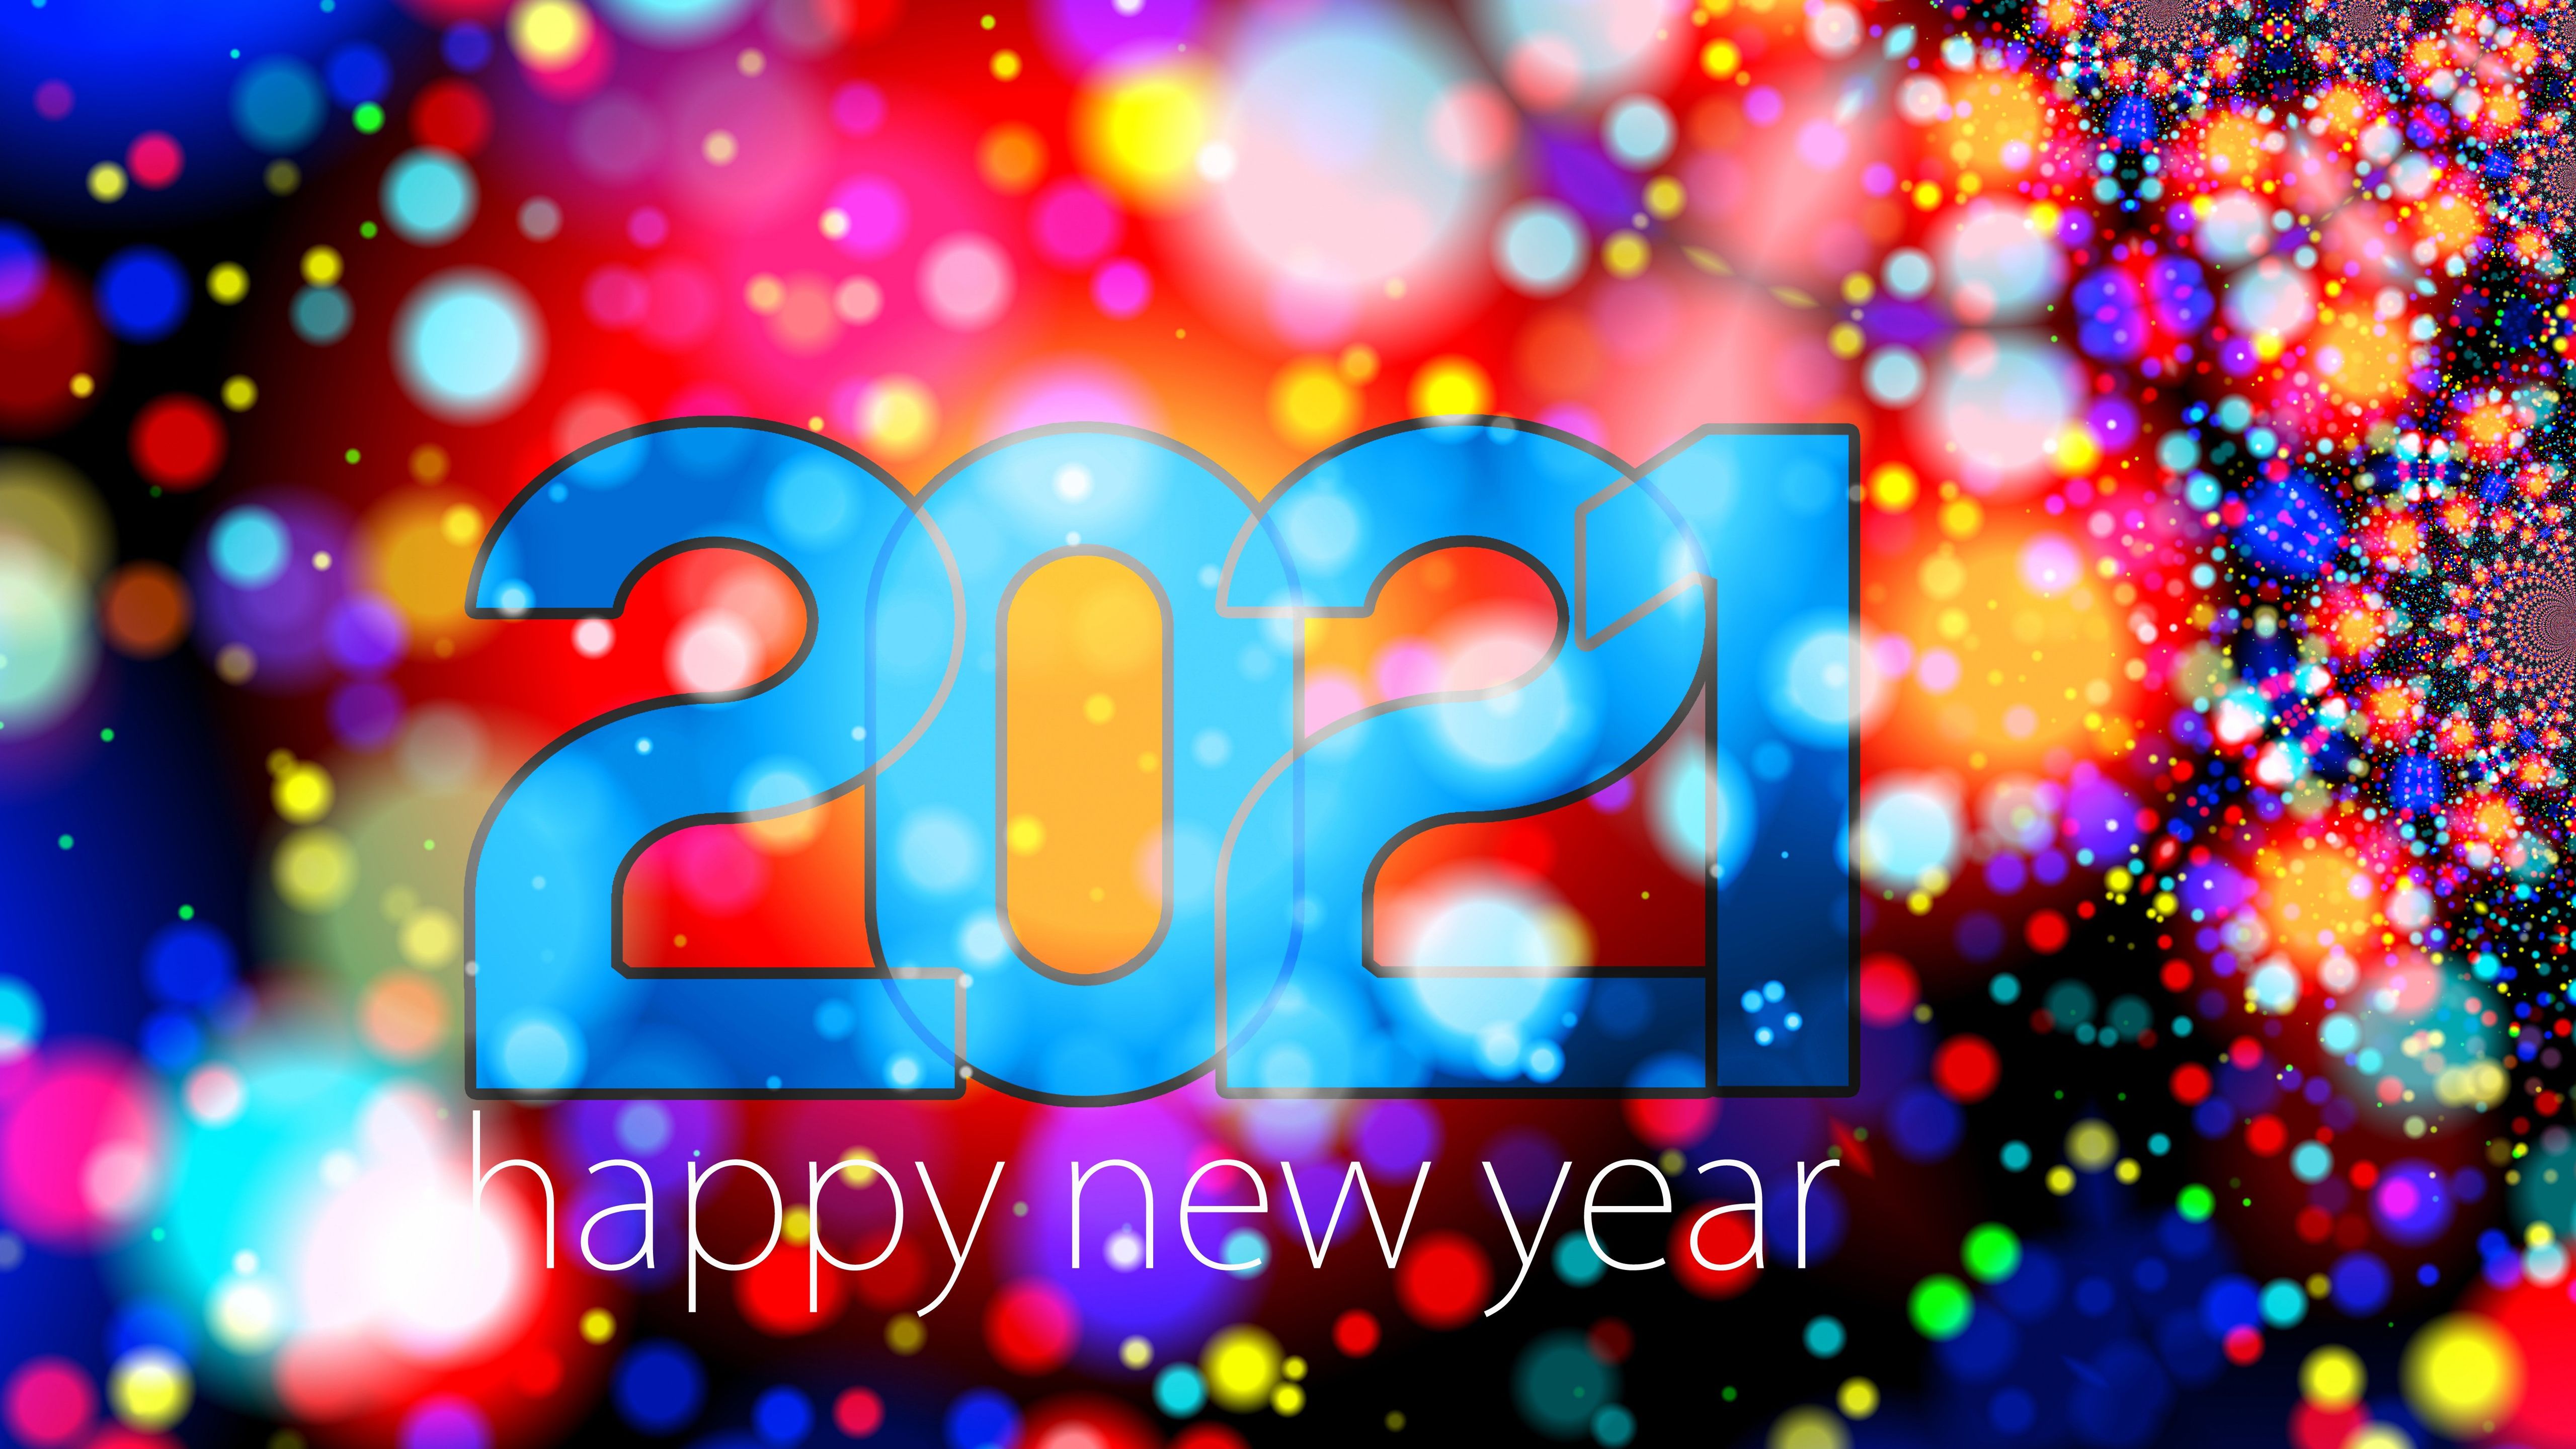 Happy New Year 2021 In Colorful Sparkling Background HD Happy New Year 2021 Wallpaper